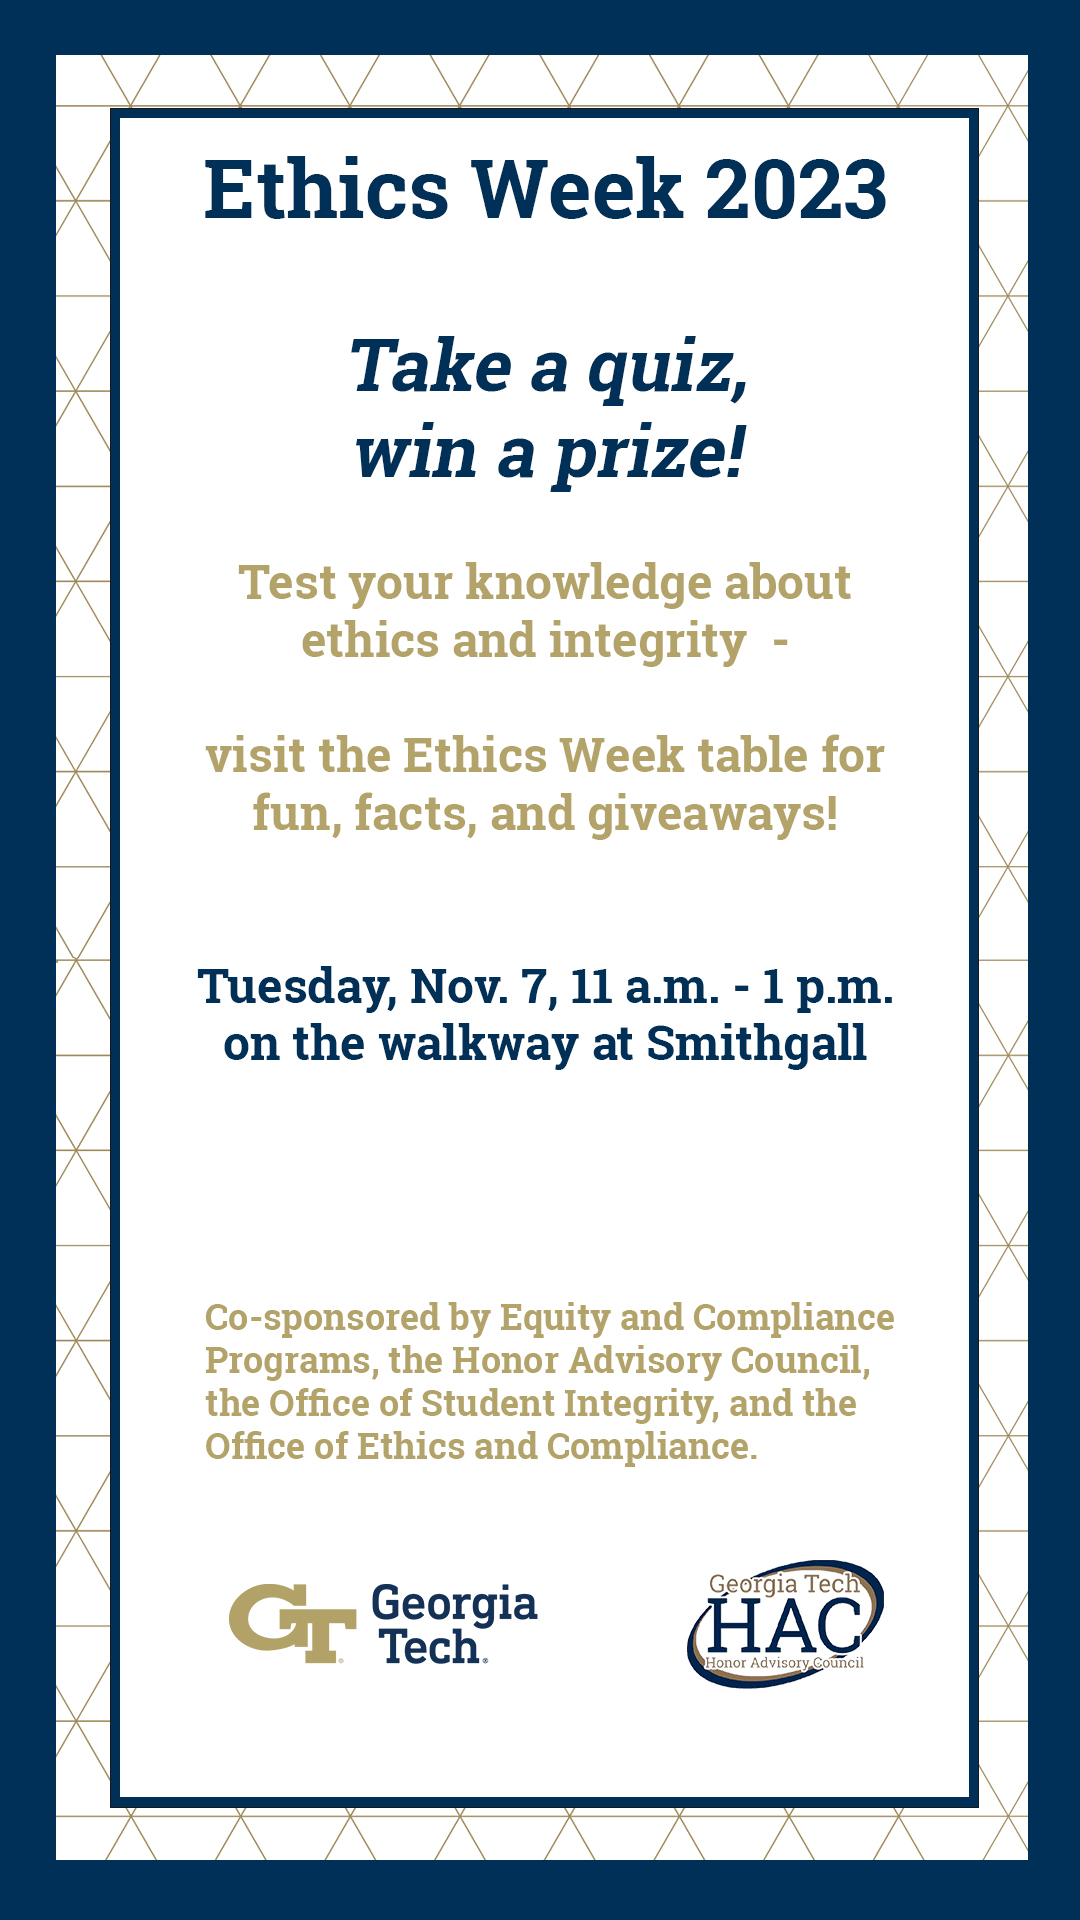 ethics week 2023 tabling November 7 from 11 am to 1 pm outside Smithgall Take a quiz and win a prize